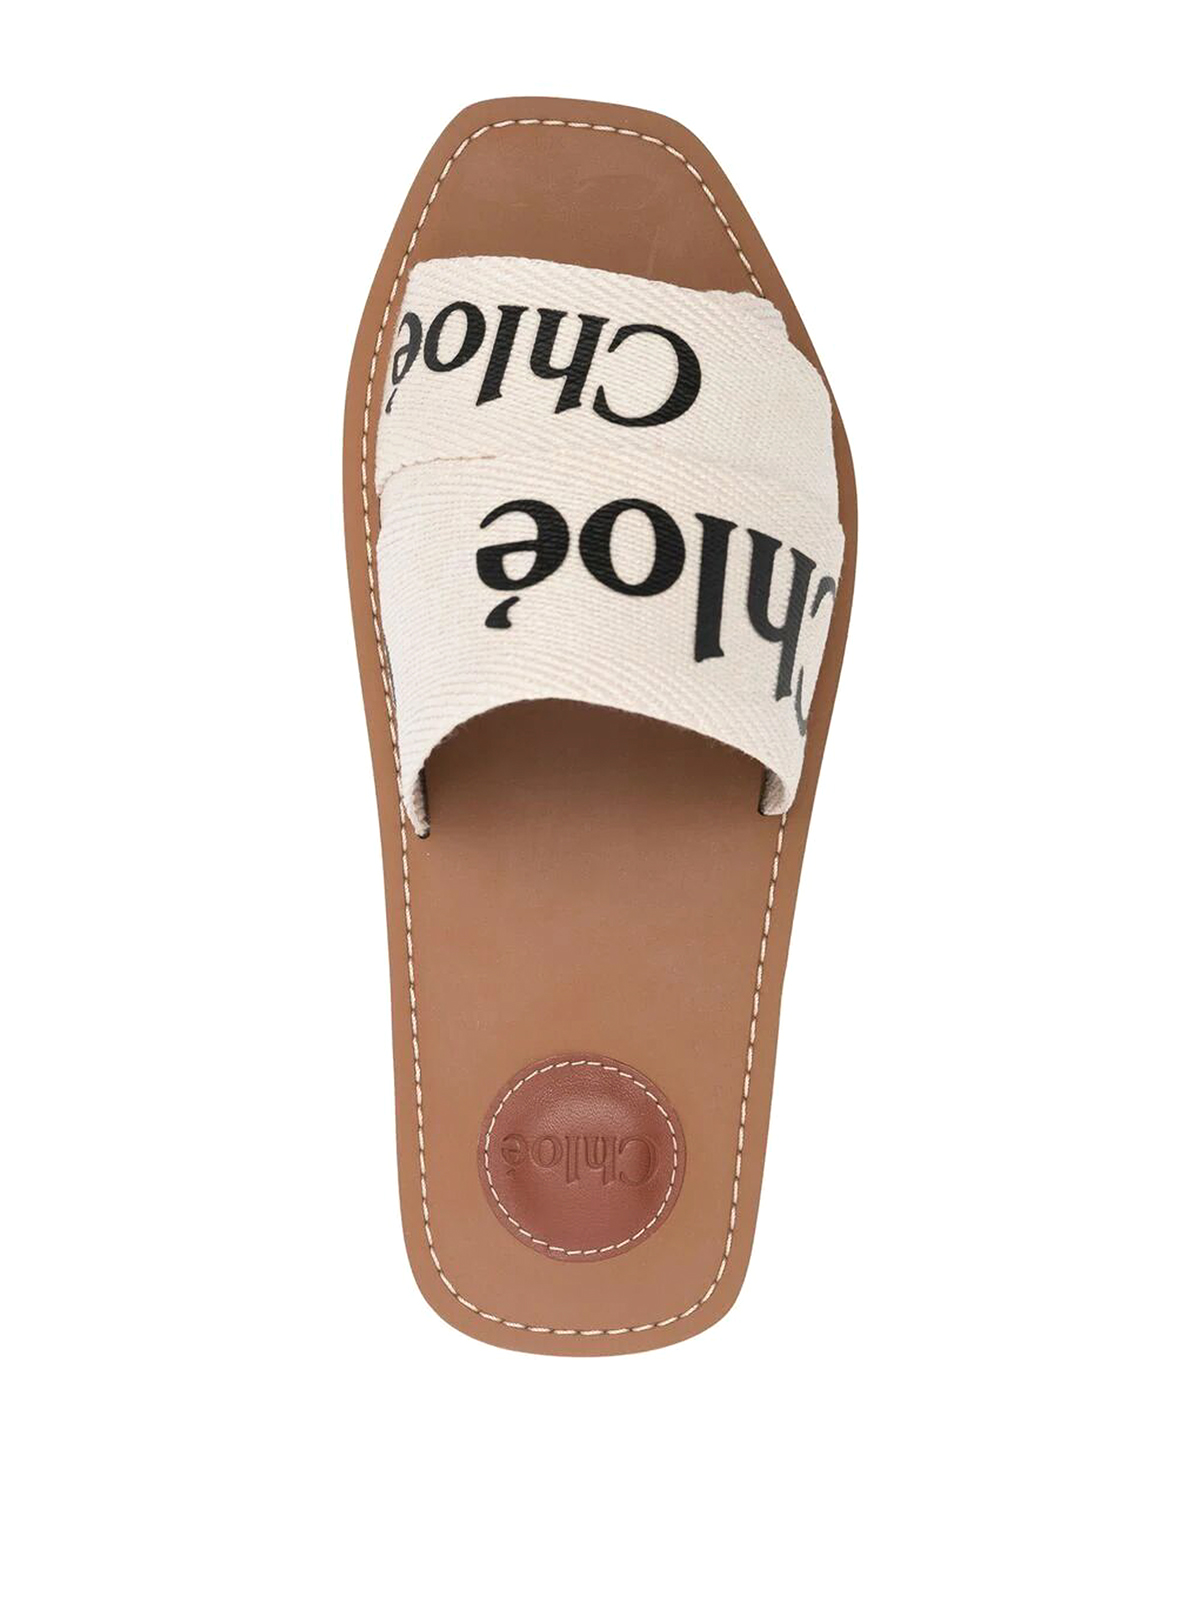 Sandals Chloe' - Flat sandals with linen band and logo - CHC19U188Z3101